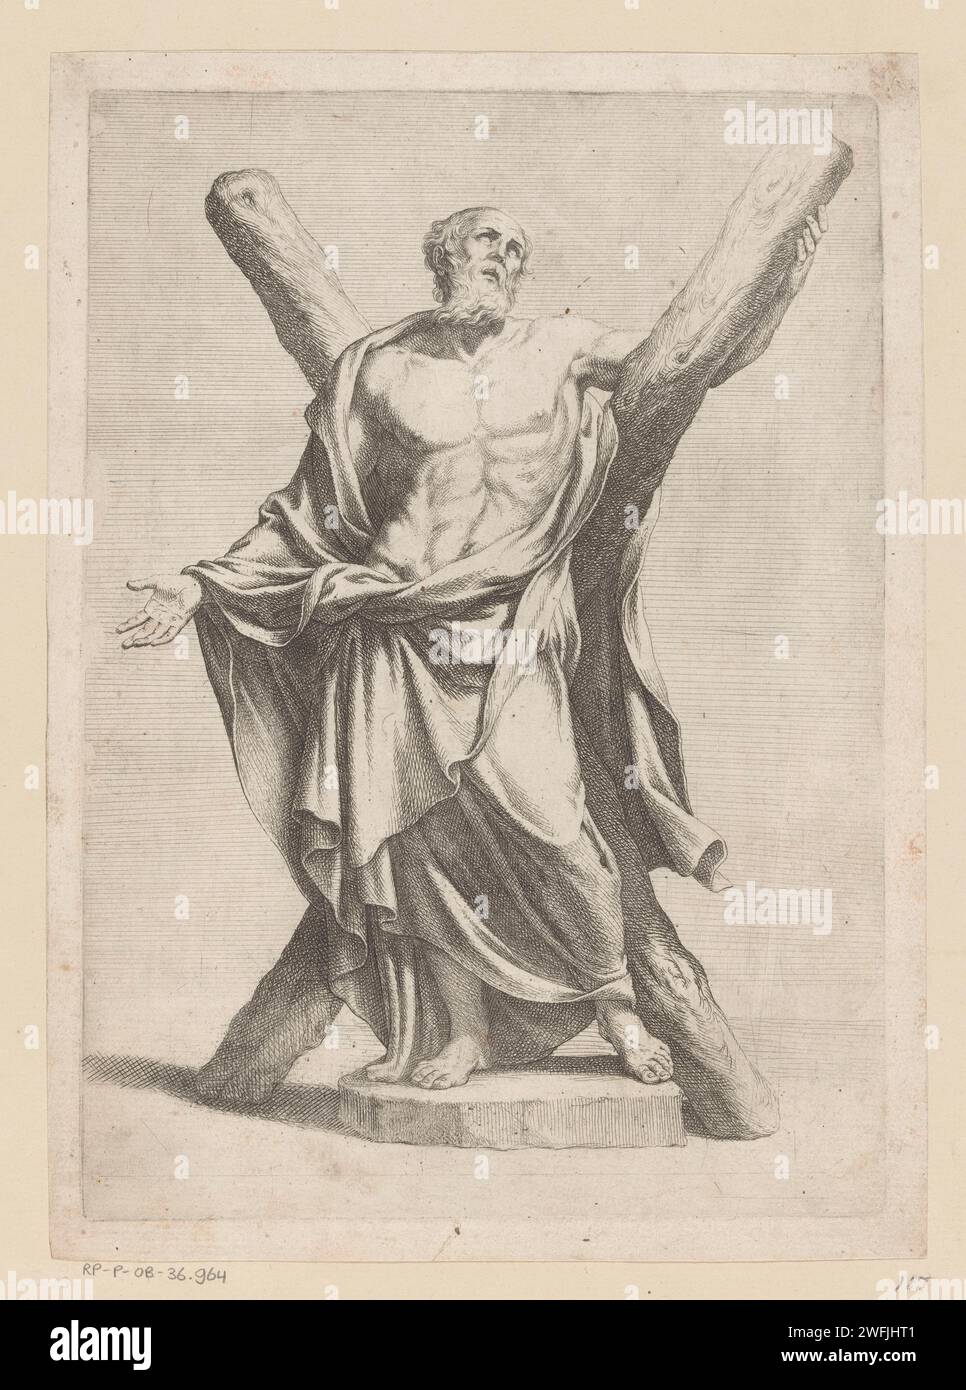 De Heilige Andreas, Pietro del Po, after François du Quesnoy, 1620 - 1692 print The holy Andreas with the Andreaskruis. Italy paper engraving the apostle Andrew; possible attributes: book, X-shaped cross, fish, fishing-net, rope, scroll - specific aspects  male saint Stock Photo